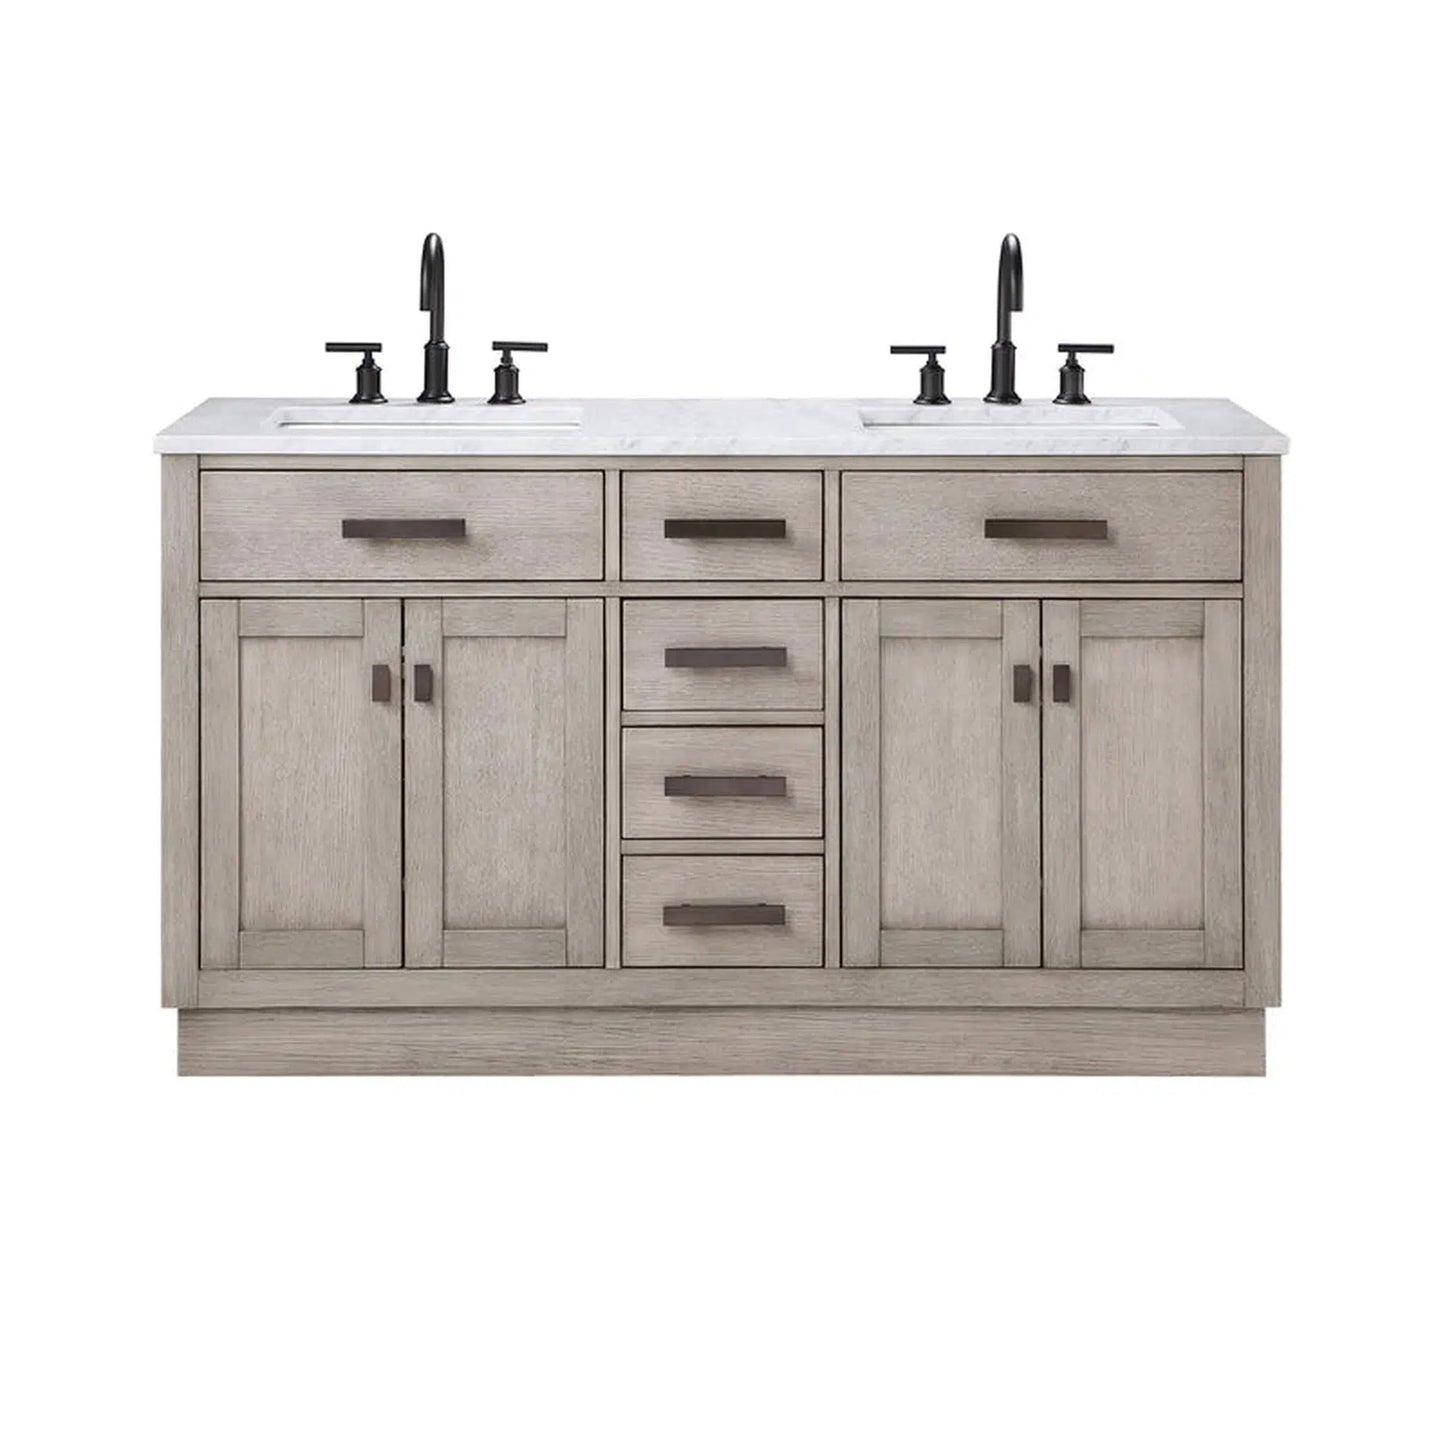 Water Creation Chestnut 60" Double Sink Carrara White Marble Countertop Vanity In Grey Oak with Grooseneck Faucets and Mirrors